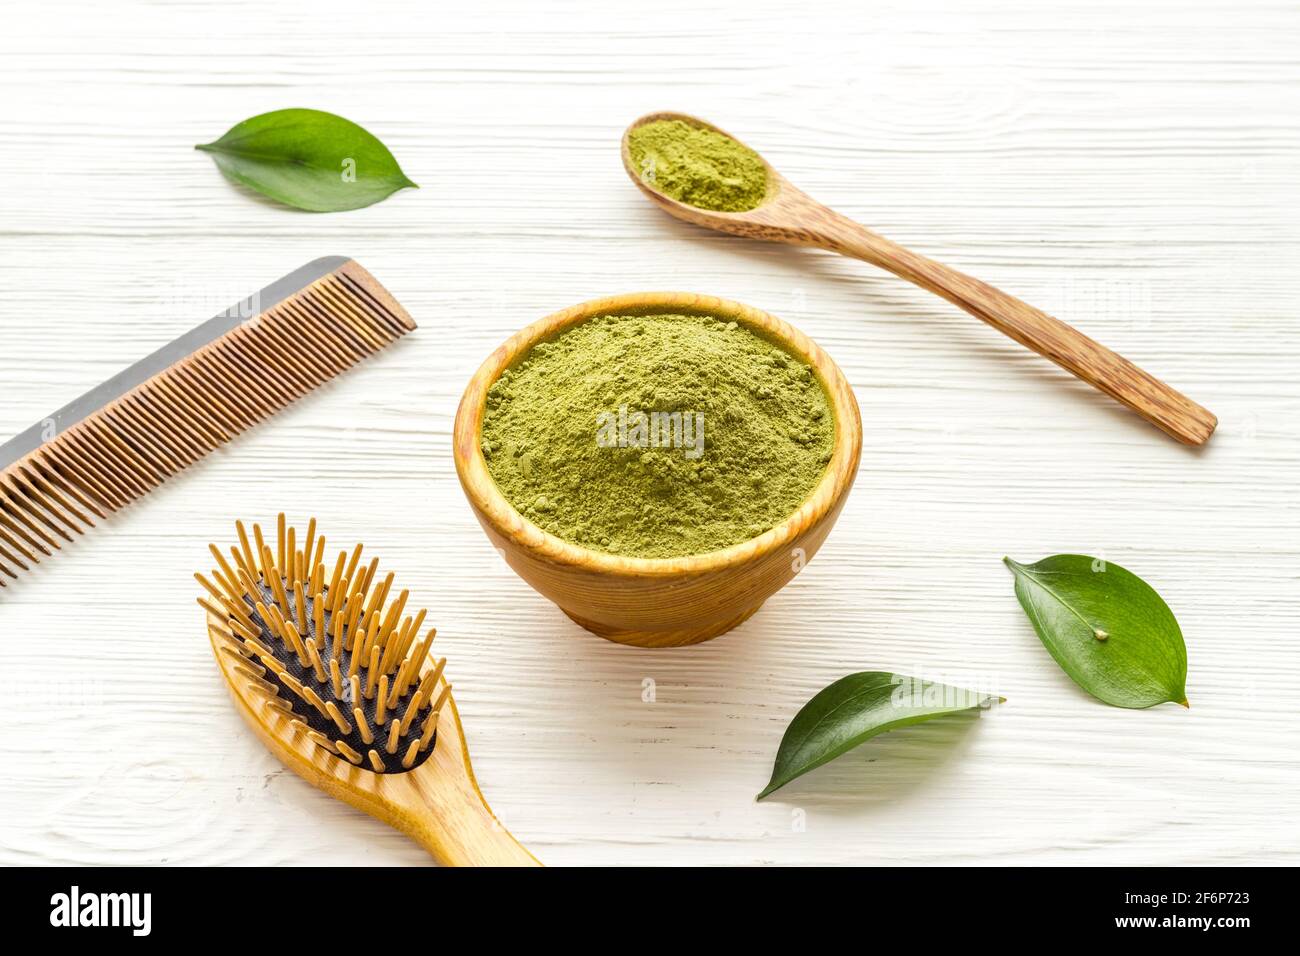 Henna powder in wooden bowl with green leaves. Herbal natural hair dye  Stock Photo - Alamy